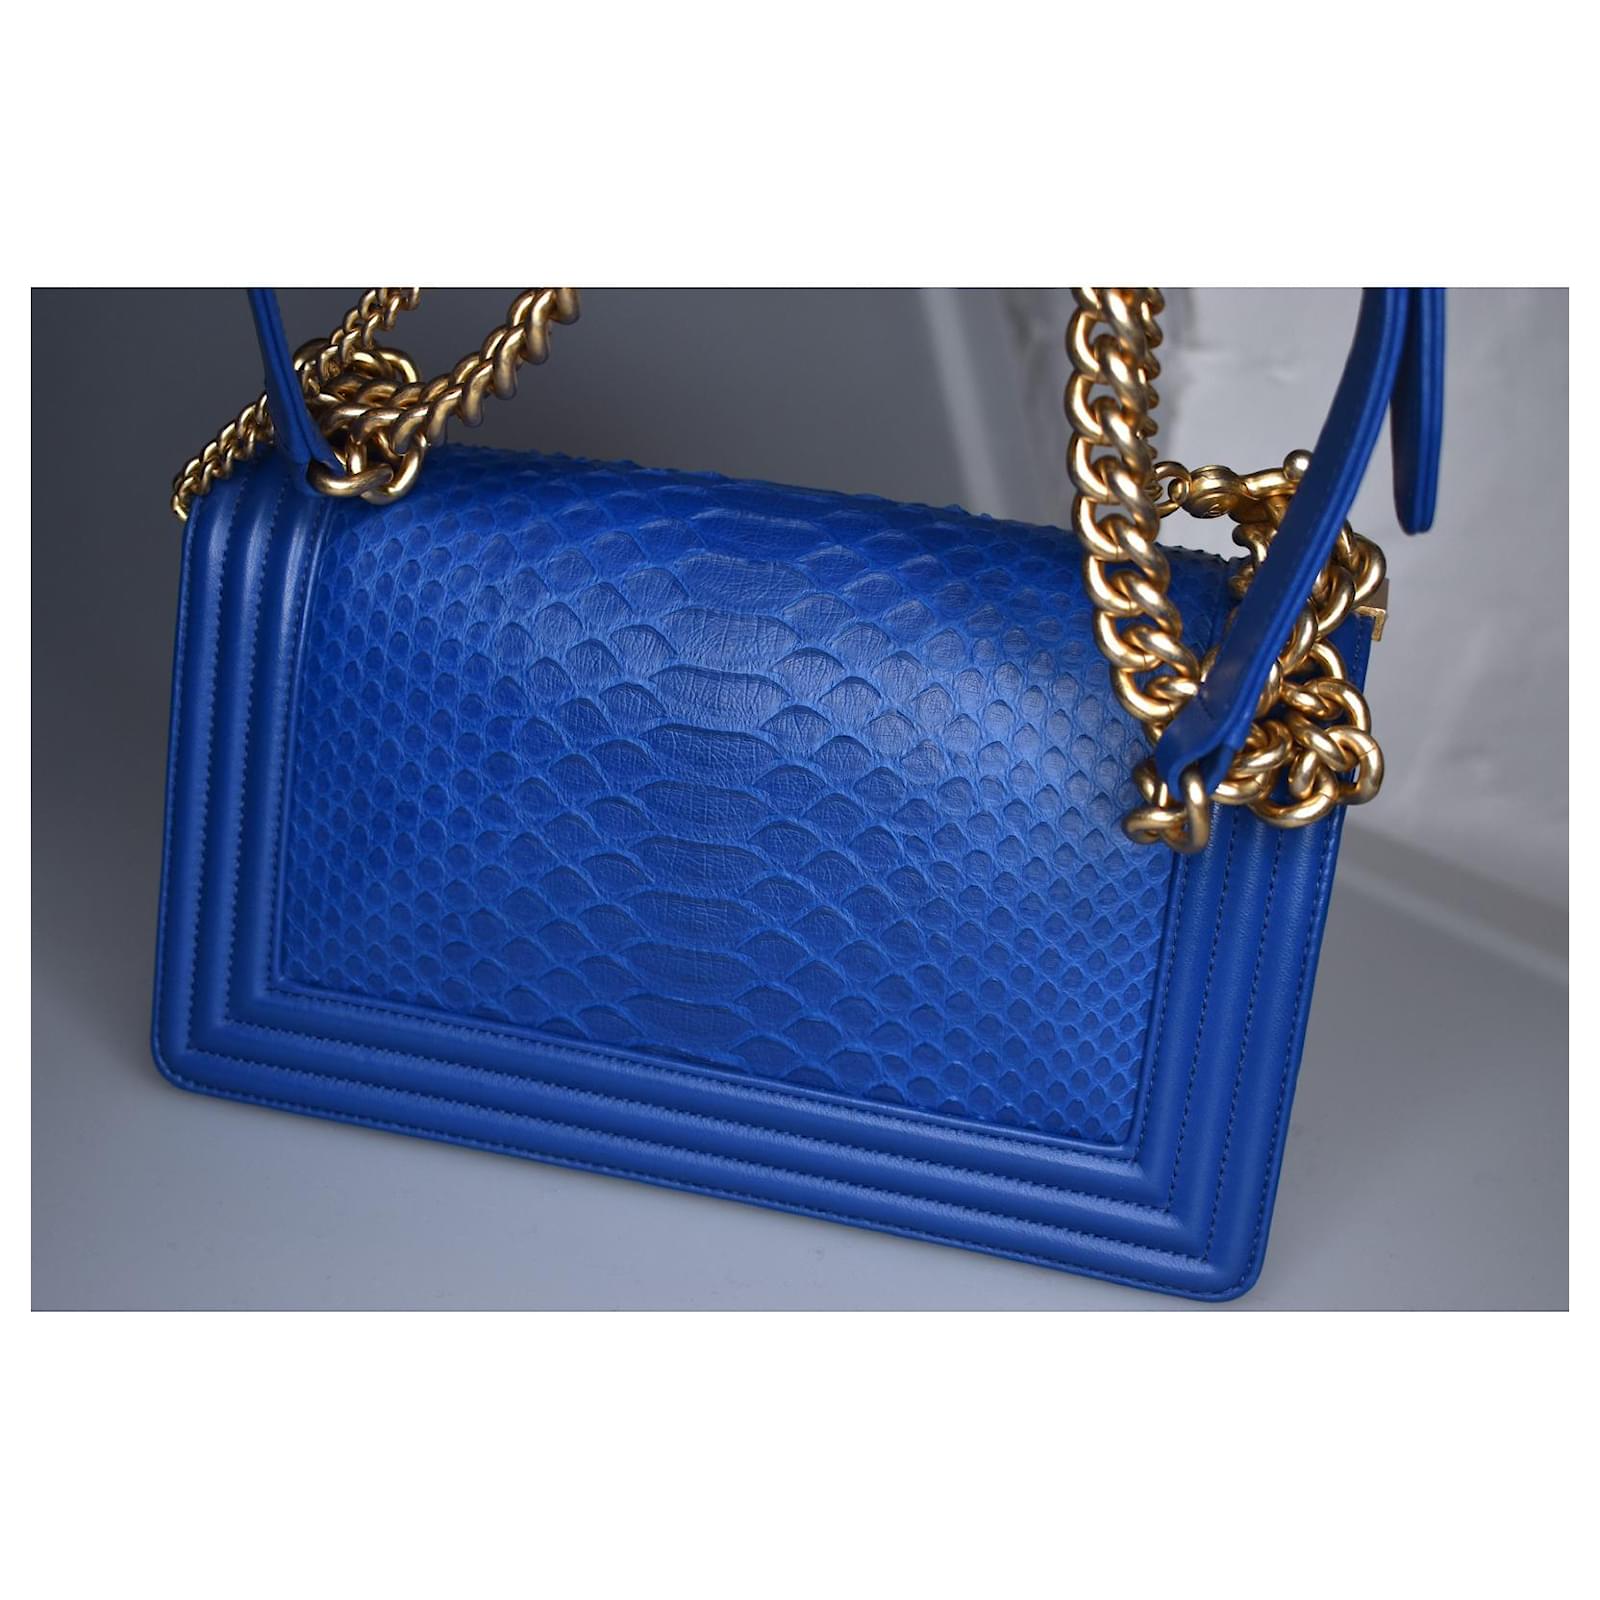 CHANEL BOY FLAP Chain Quilted Women's Shoulder Bag - Medium, Pink Patent  Leather $2,474.24 - PicClick